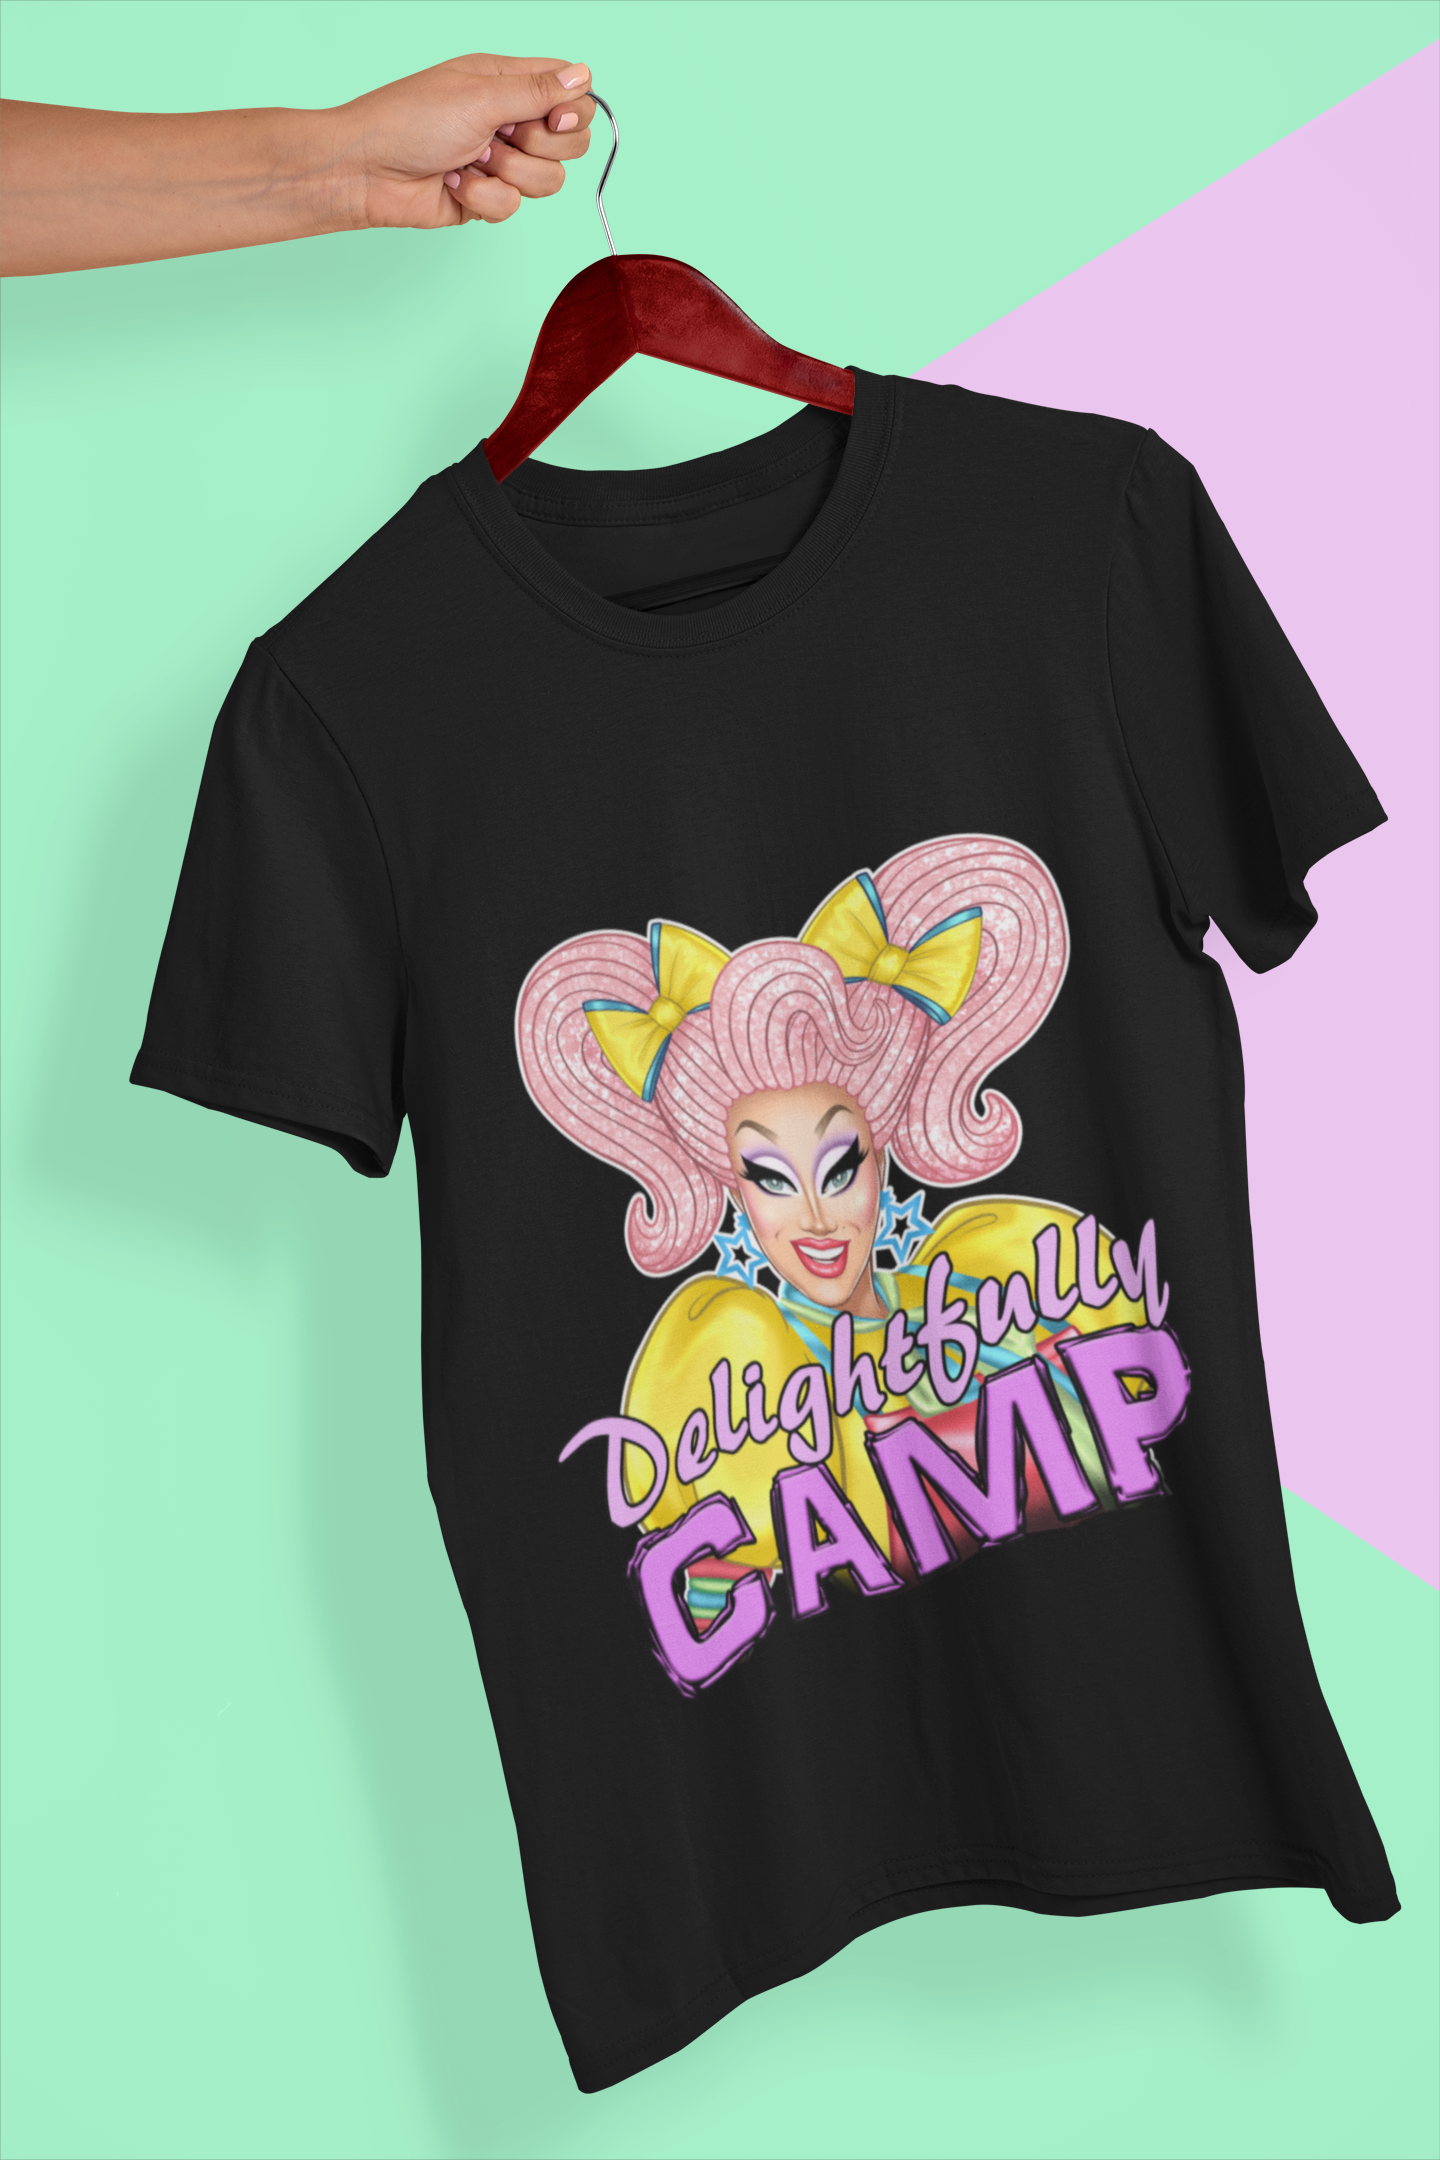 Kita Mean is Delightfully Camp Tour T Shirt